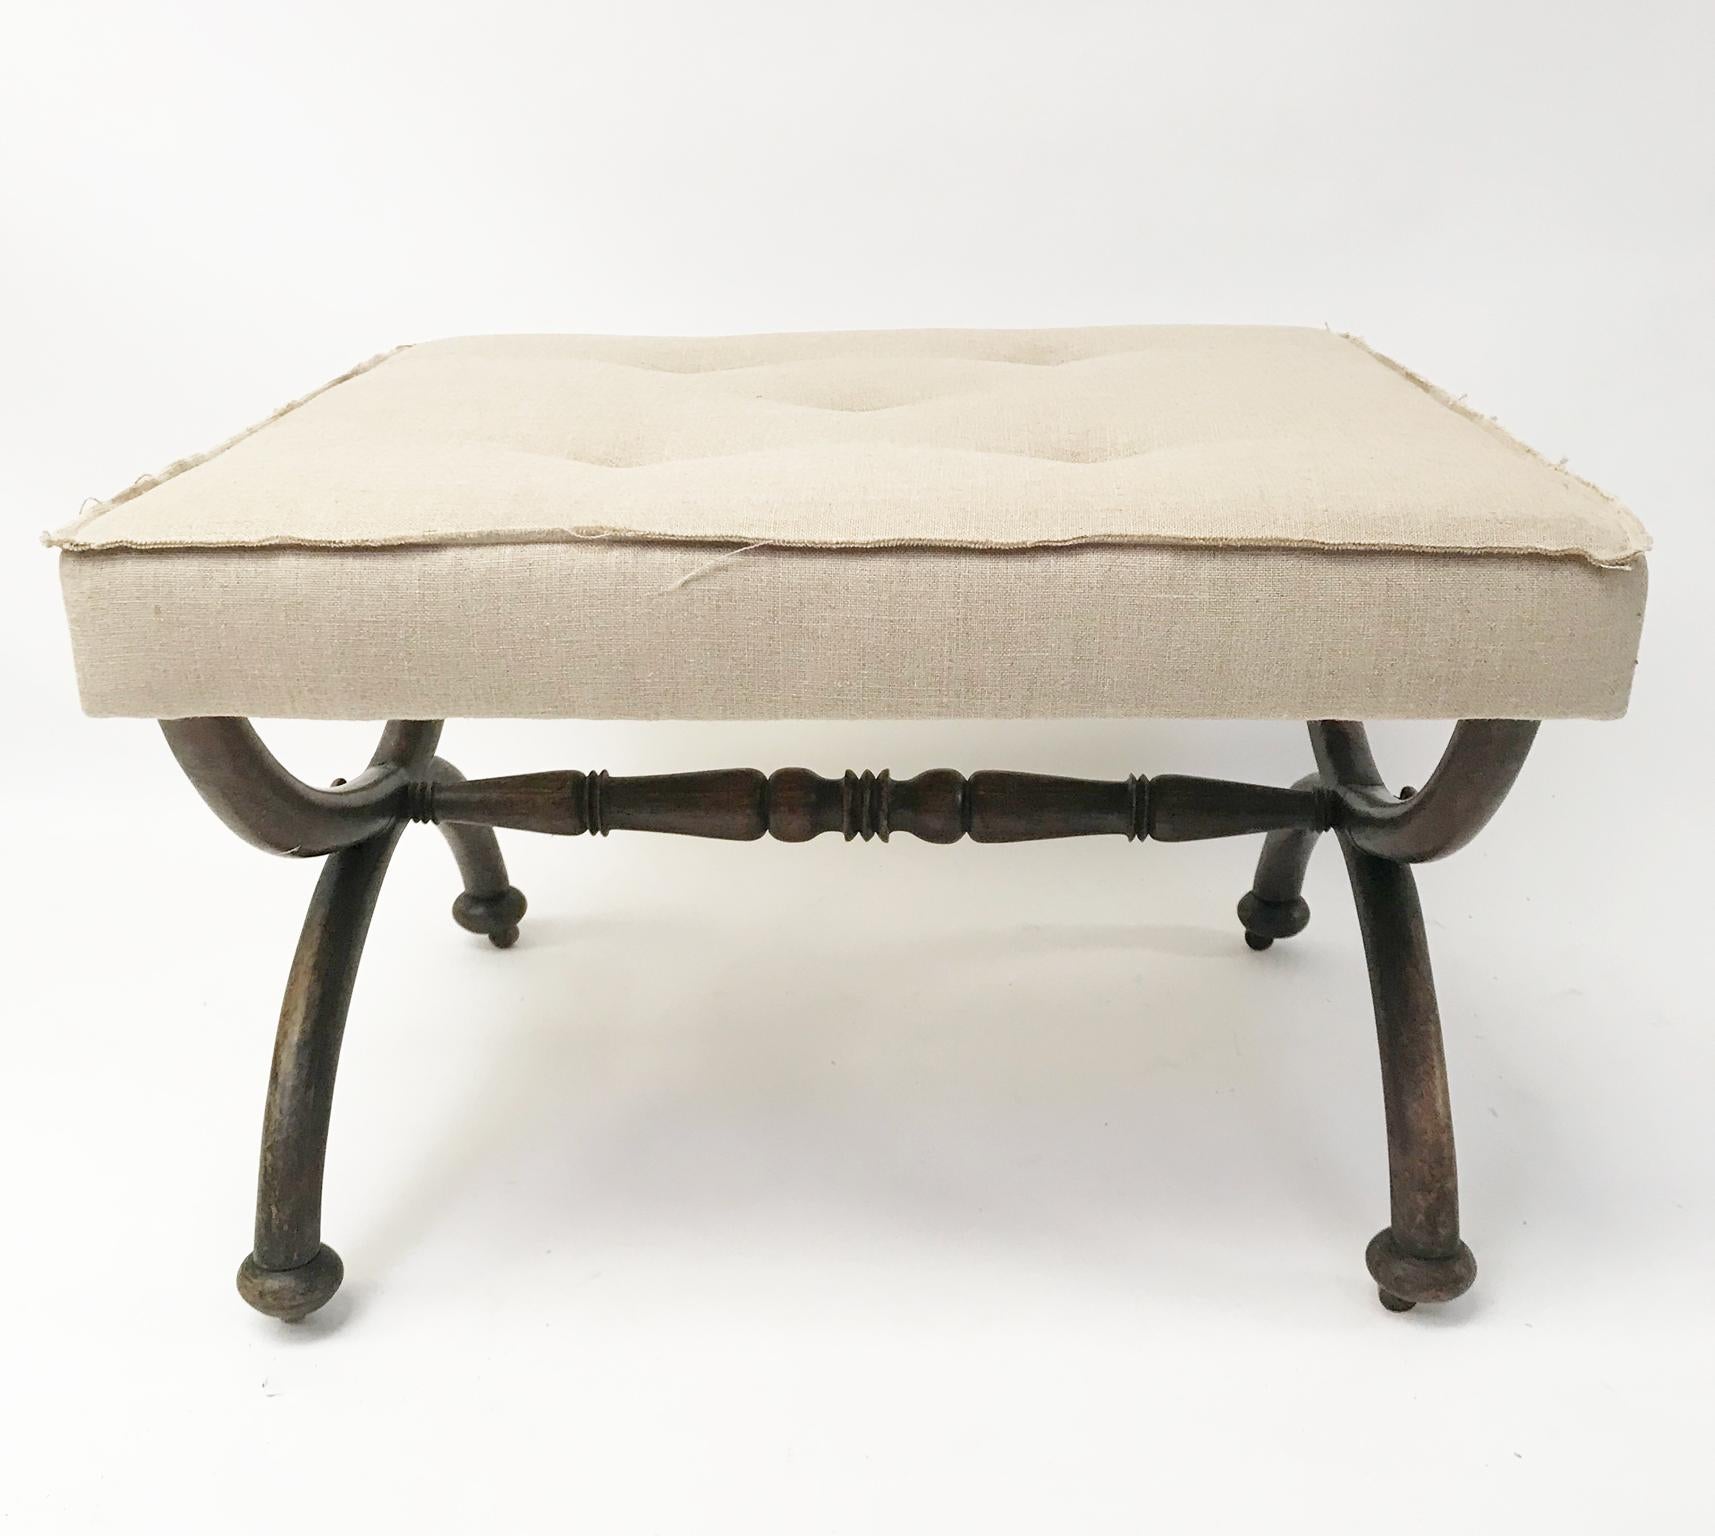 A large late Regency X-framed English stool, circa 1840.
The large squared top upholstered in linen, x-frame, with a turned rosewood central stretcher, hidden ceramic coasters under bun terminal feet. 
Upholstered stylishly with a raw edge in a